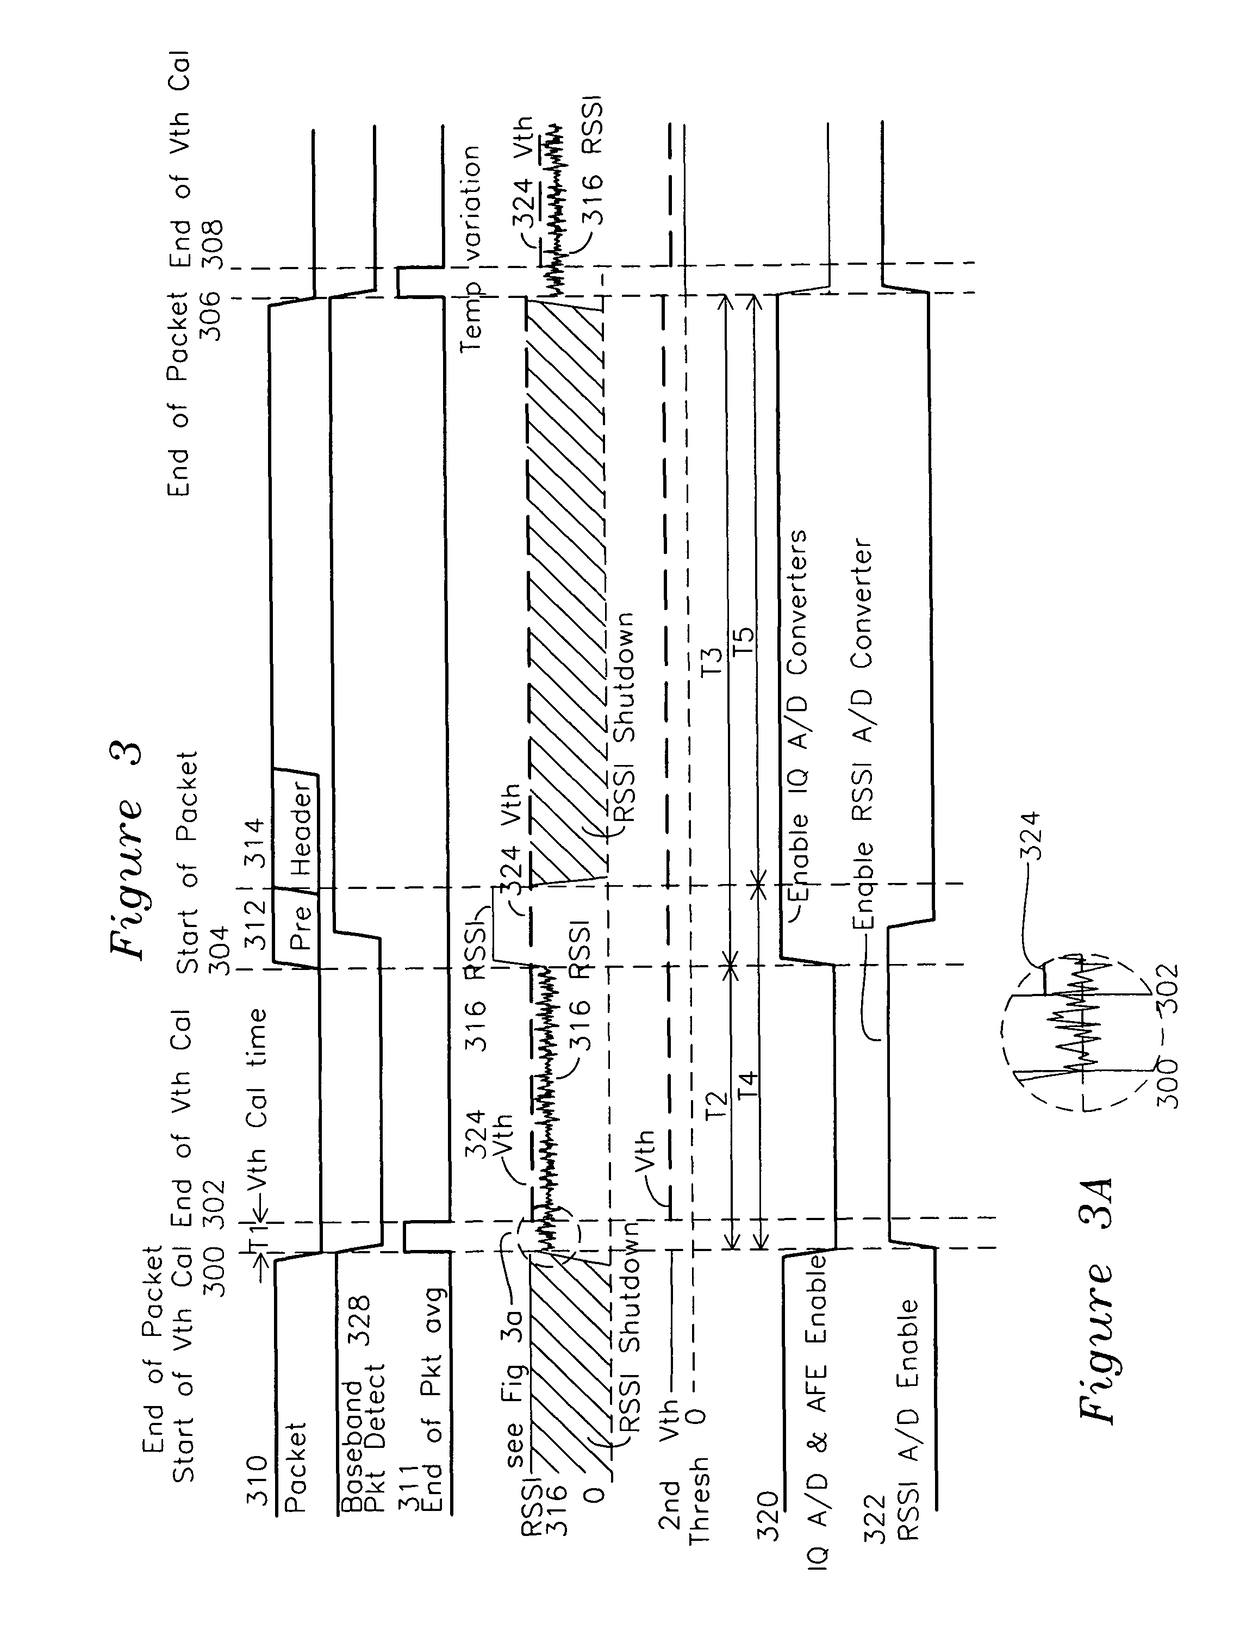 RSSI-based powerdown apparatus and method for a wireless communications system